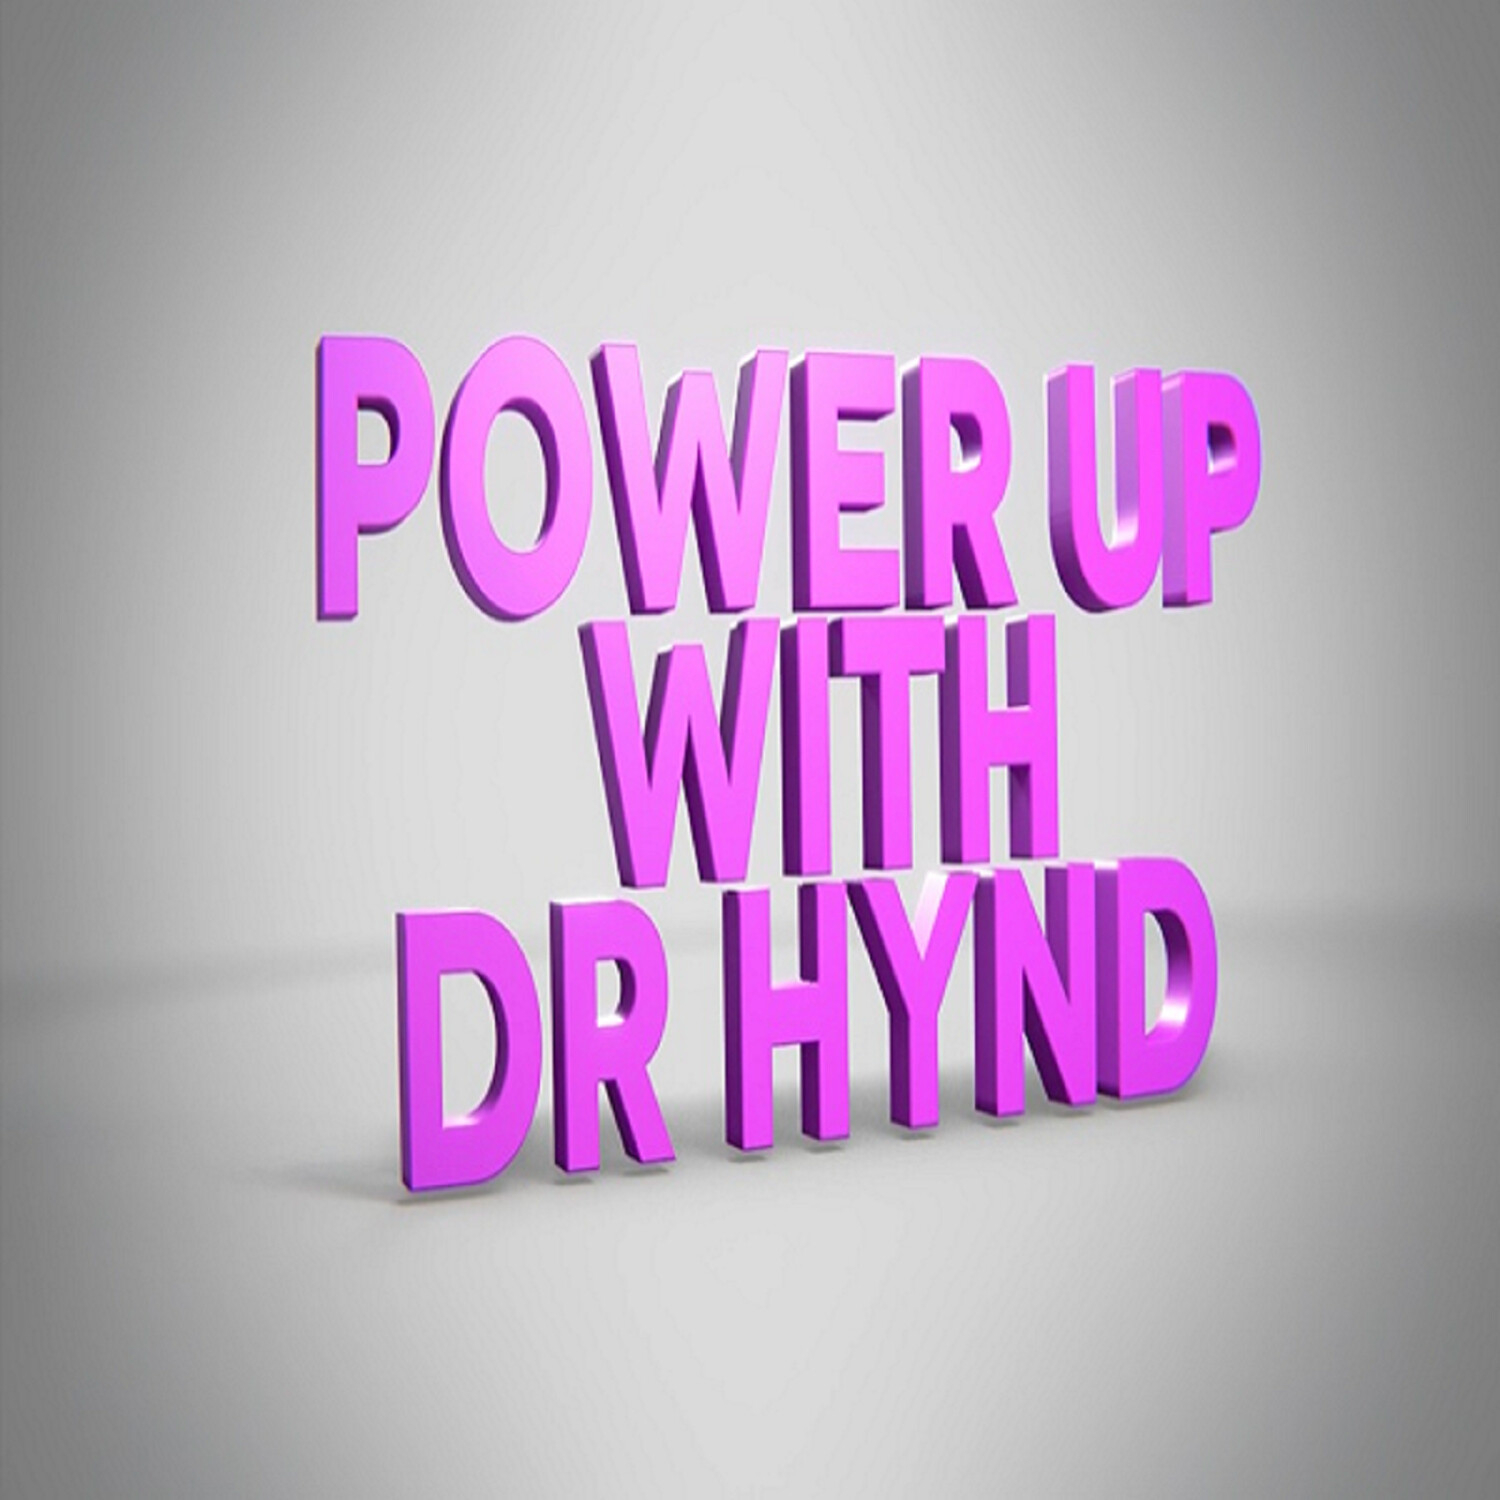 Women's Empowerment Series with Dr. Hynd and Dr. Harbeen Arora Rai